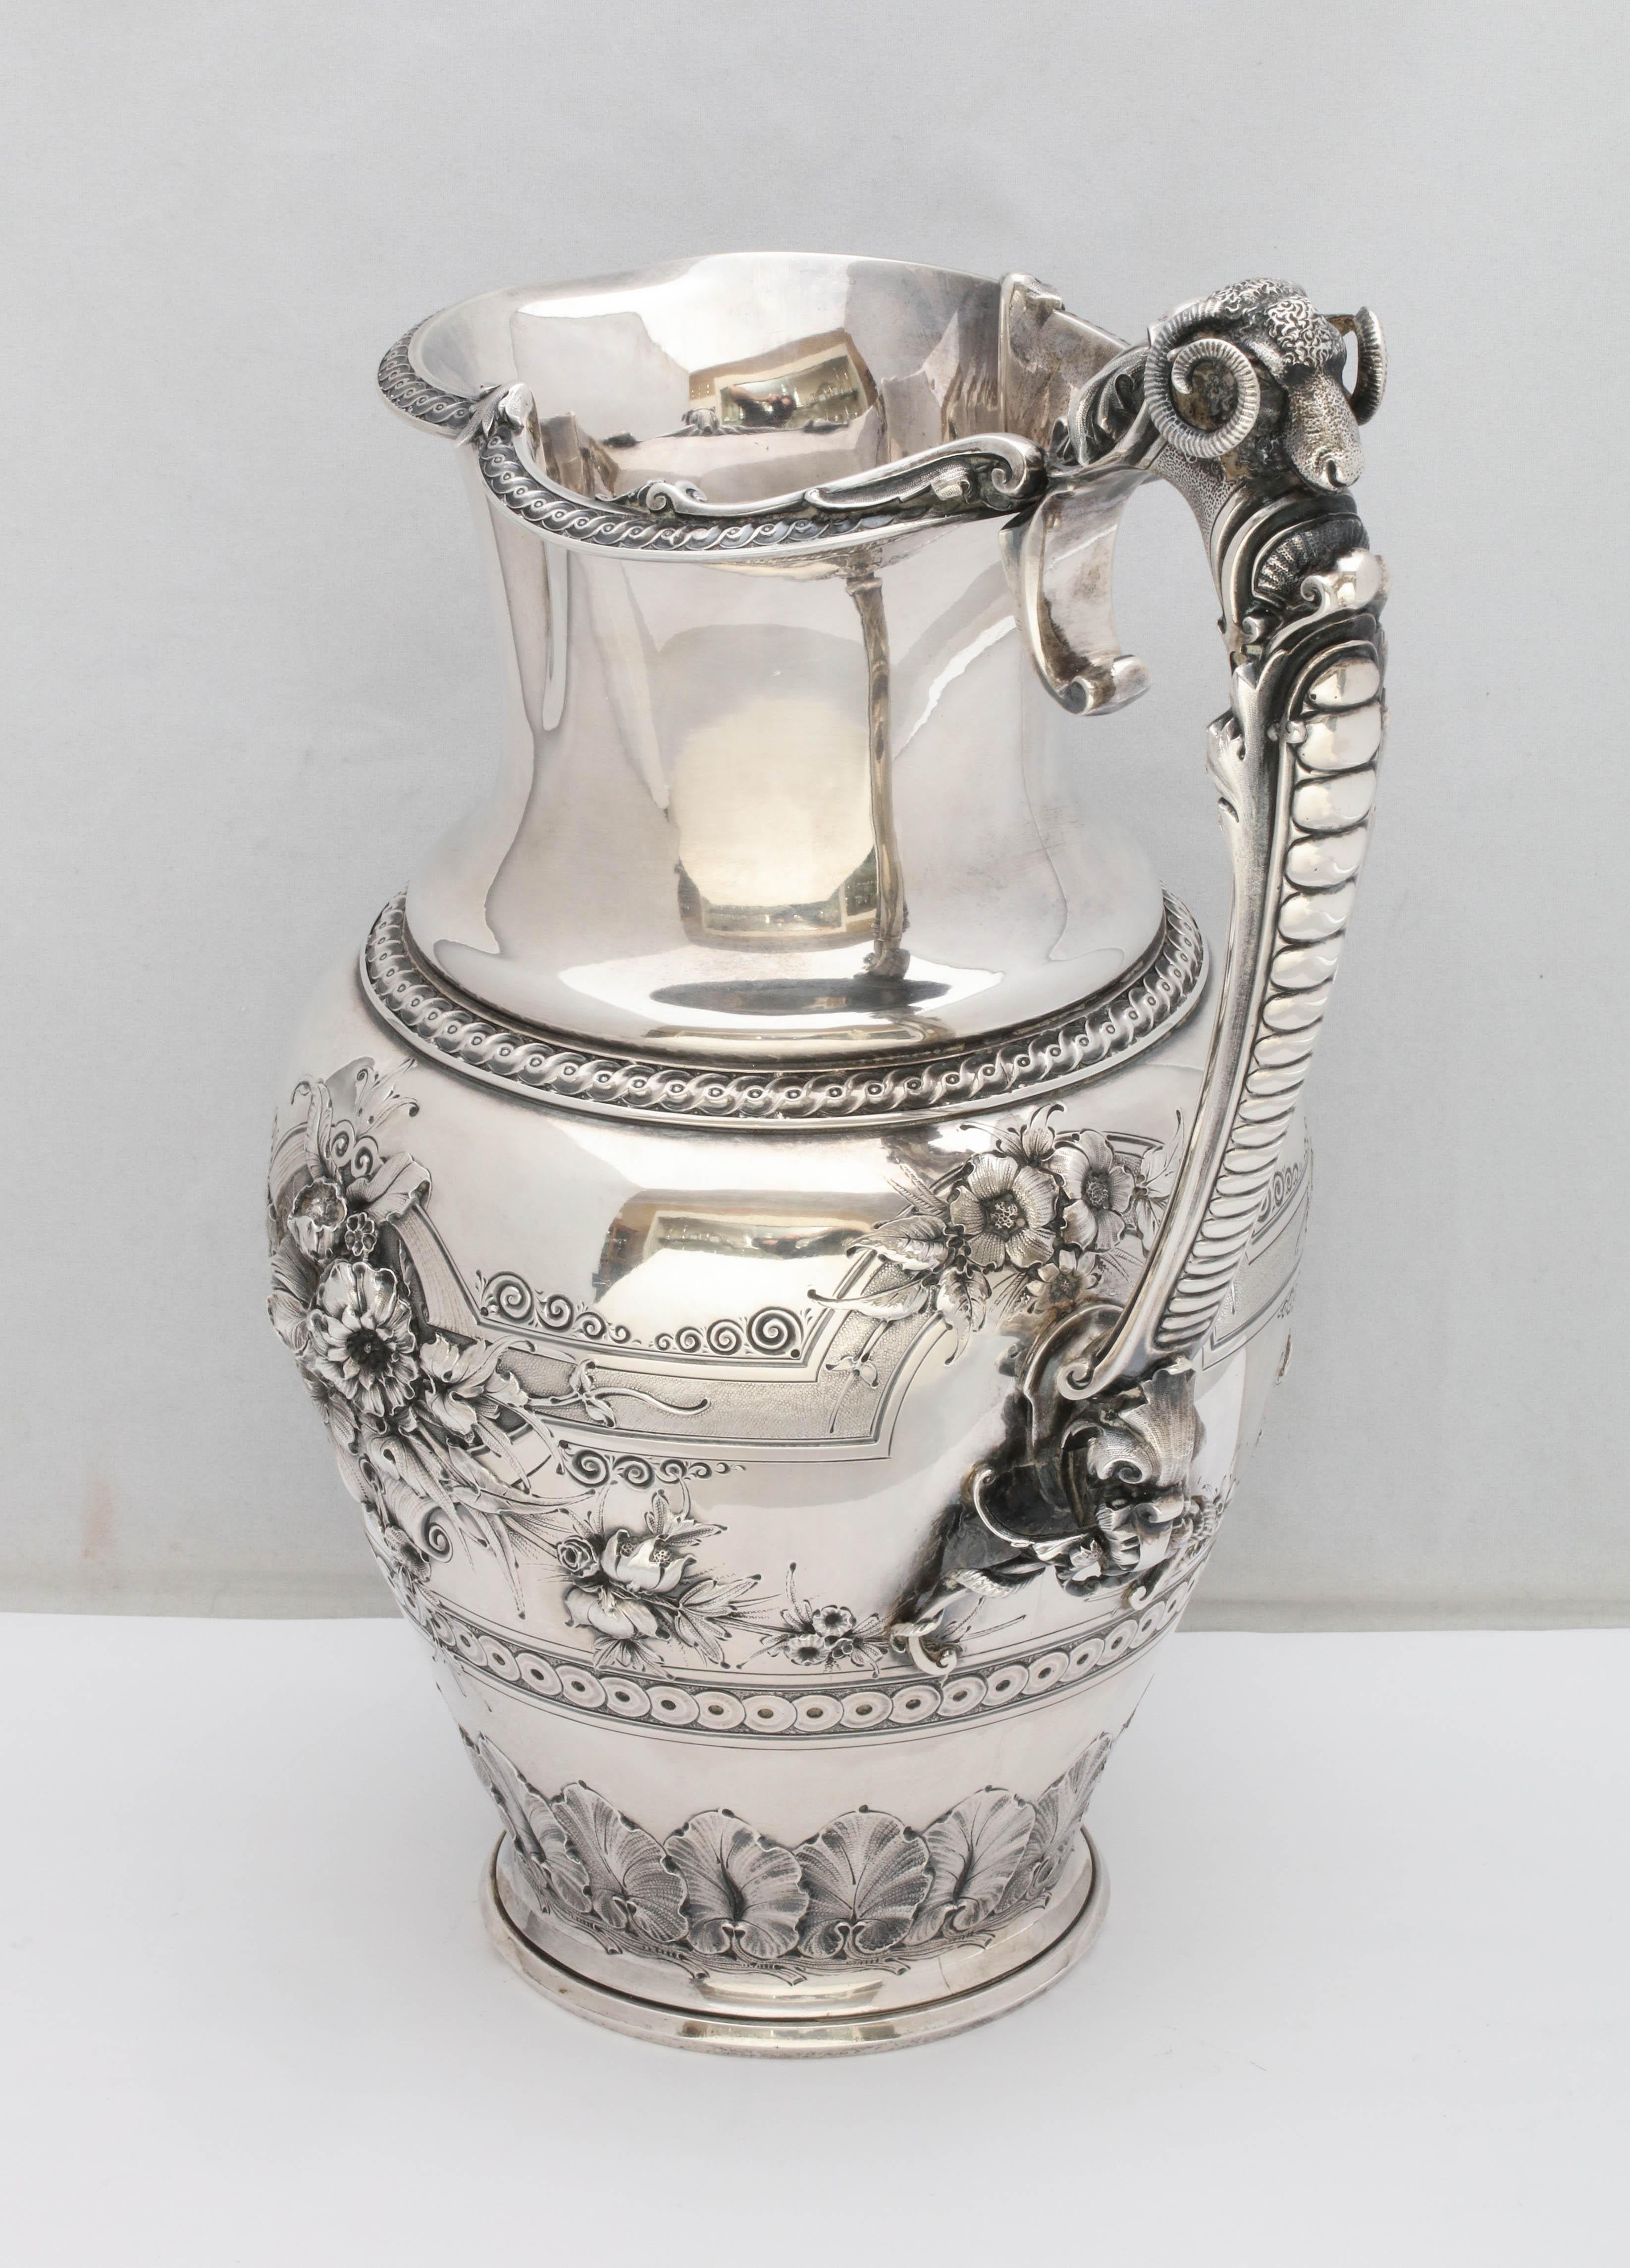 Large, neoclassical, Coin Silver pitcher by Gorham Manufacturing Co., Providence Rhode Island, circa 1860. Decorated with flowers and leaves, and having a ram's head at the top of the handle. Rim of opening is gracefully scalloped. Measures 12 3/4